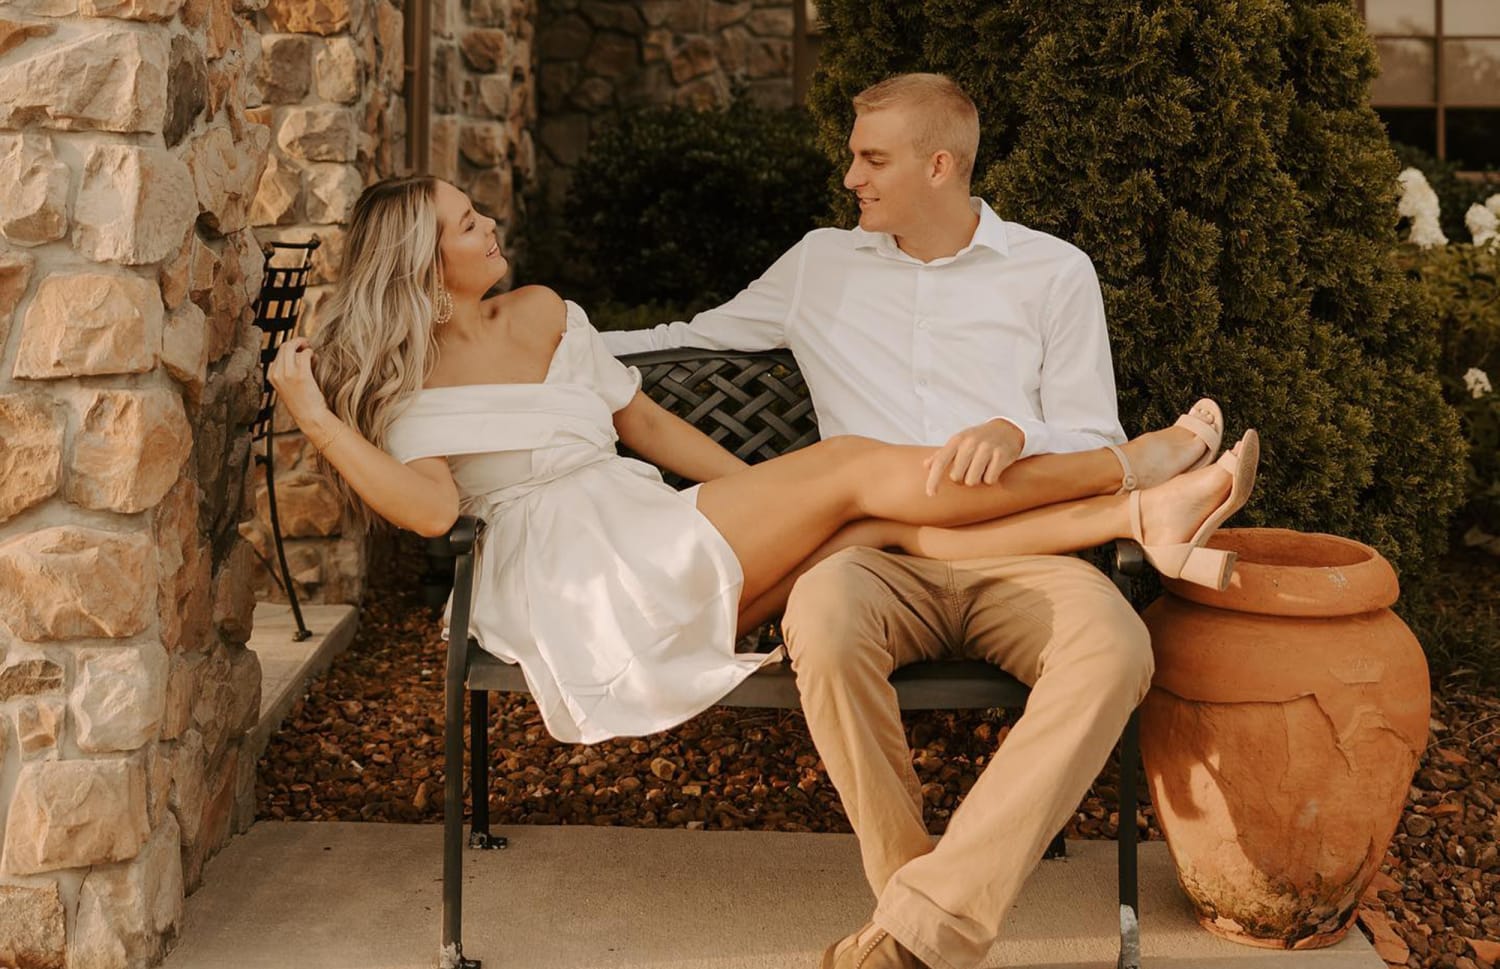 patron Monumental driver Couple Goes Viral for Olive Garden Engagement Photos: 'Italy Vibes'